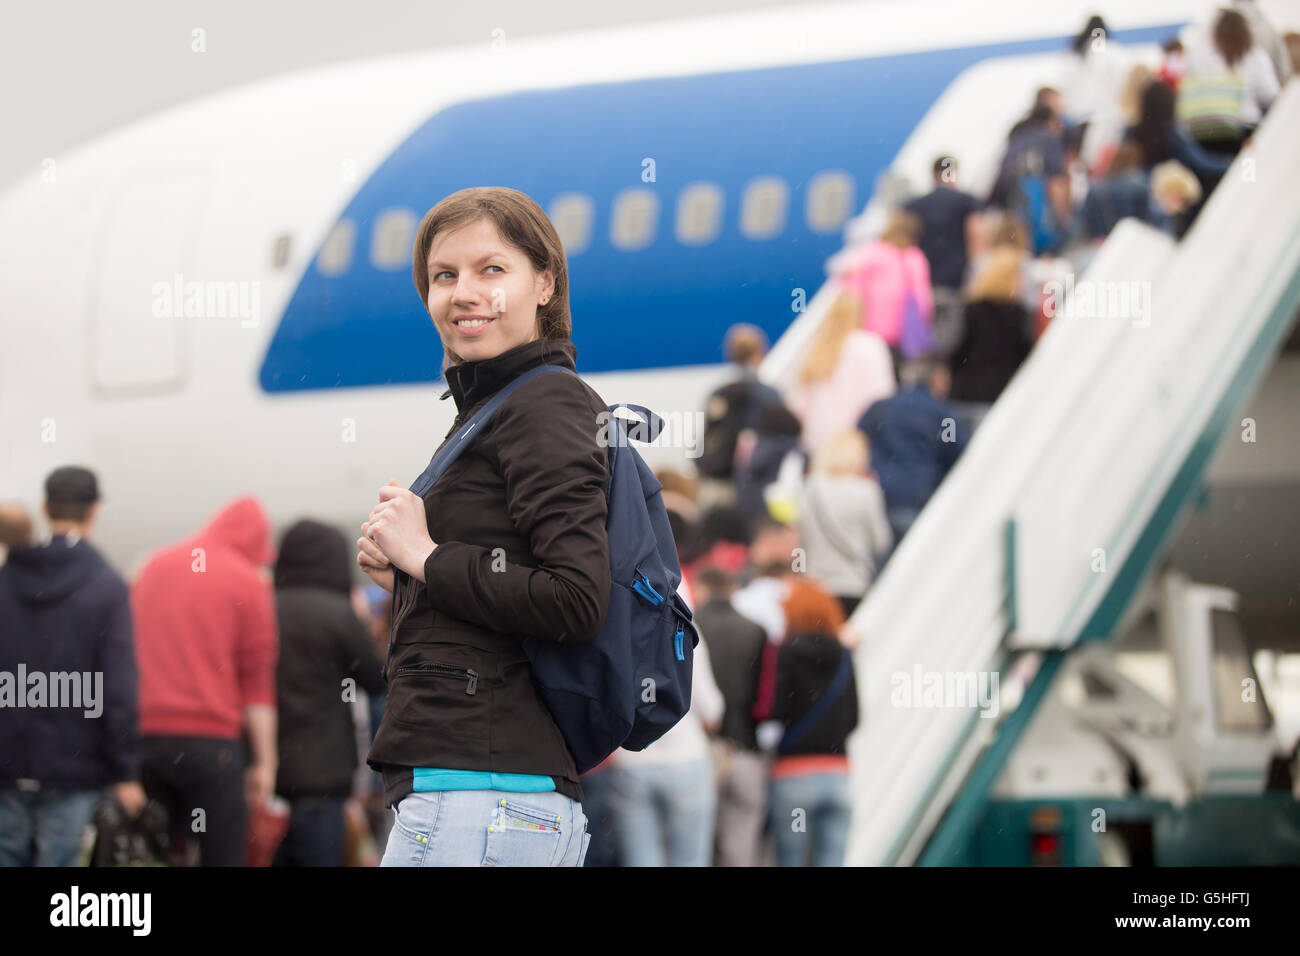 Young Caucasian cheerful smiling woman passenger in 20s travelling with backpack, boarding airplane, people climbing ramp Stock Photo